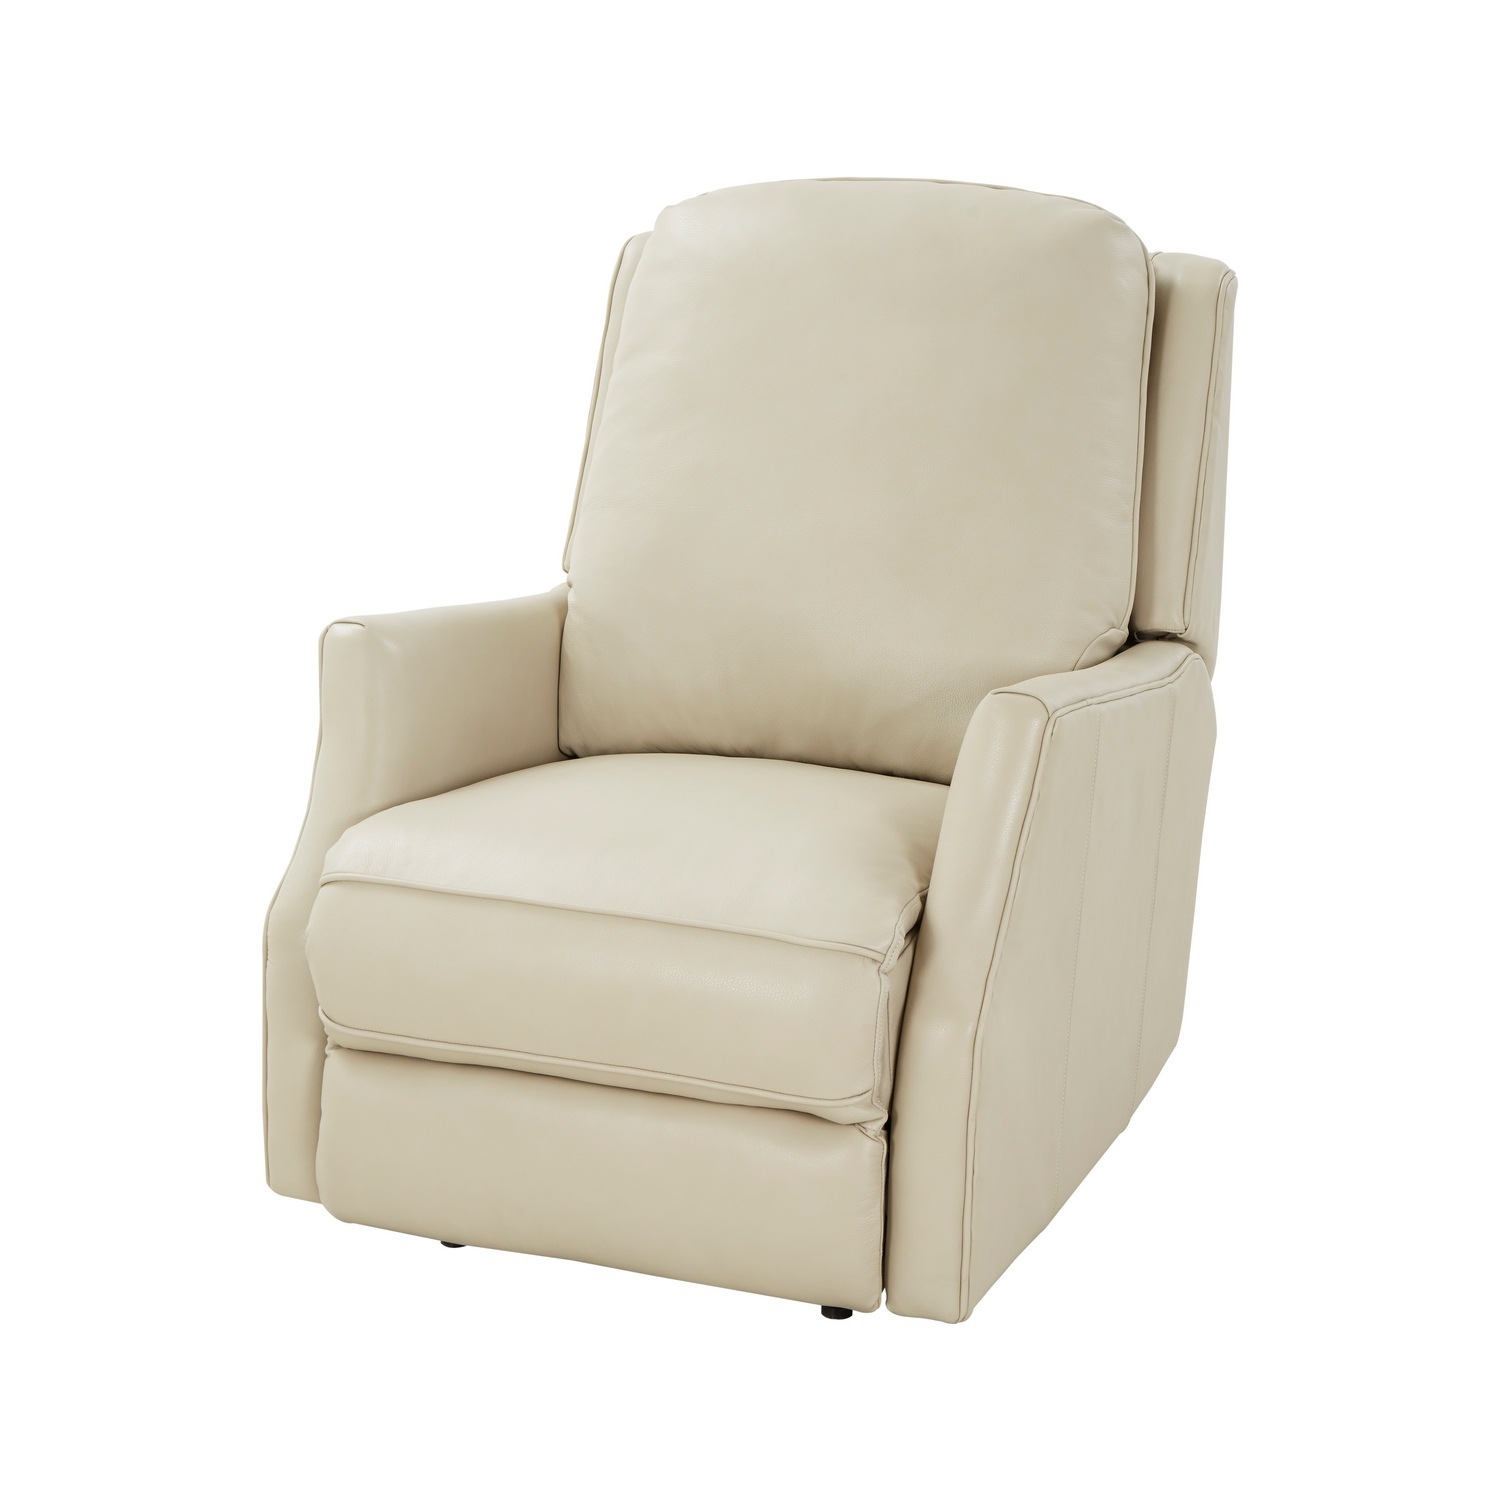 Barcalounger Springfield Power Recliner Chair - Barone Parchment/All Leather